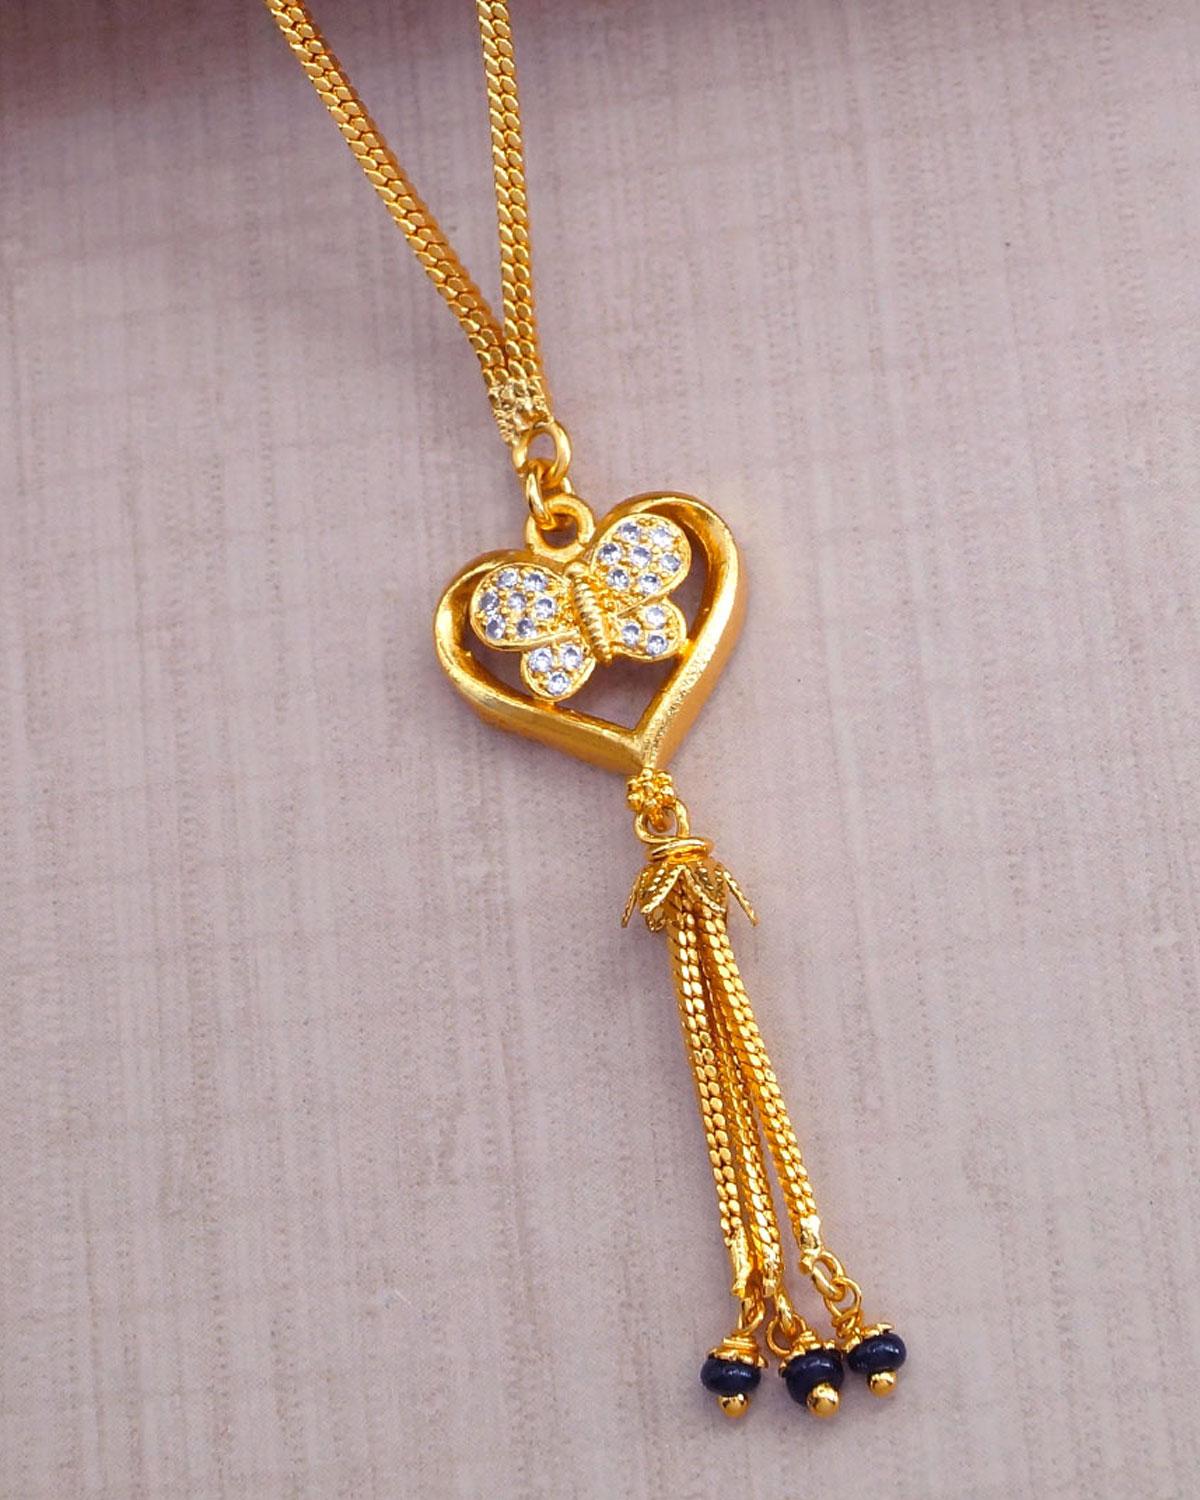 Daily Use Gold Imitation Butterfly Pendant Short Chain Gold Design